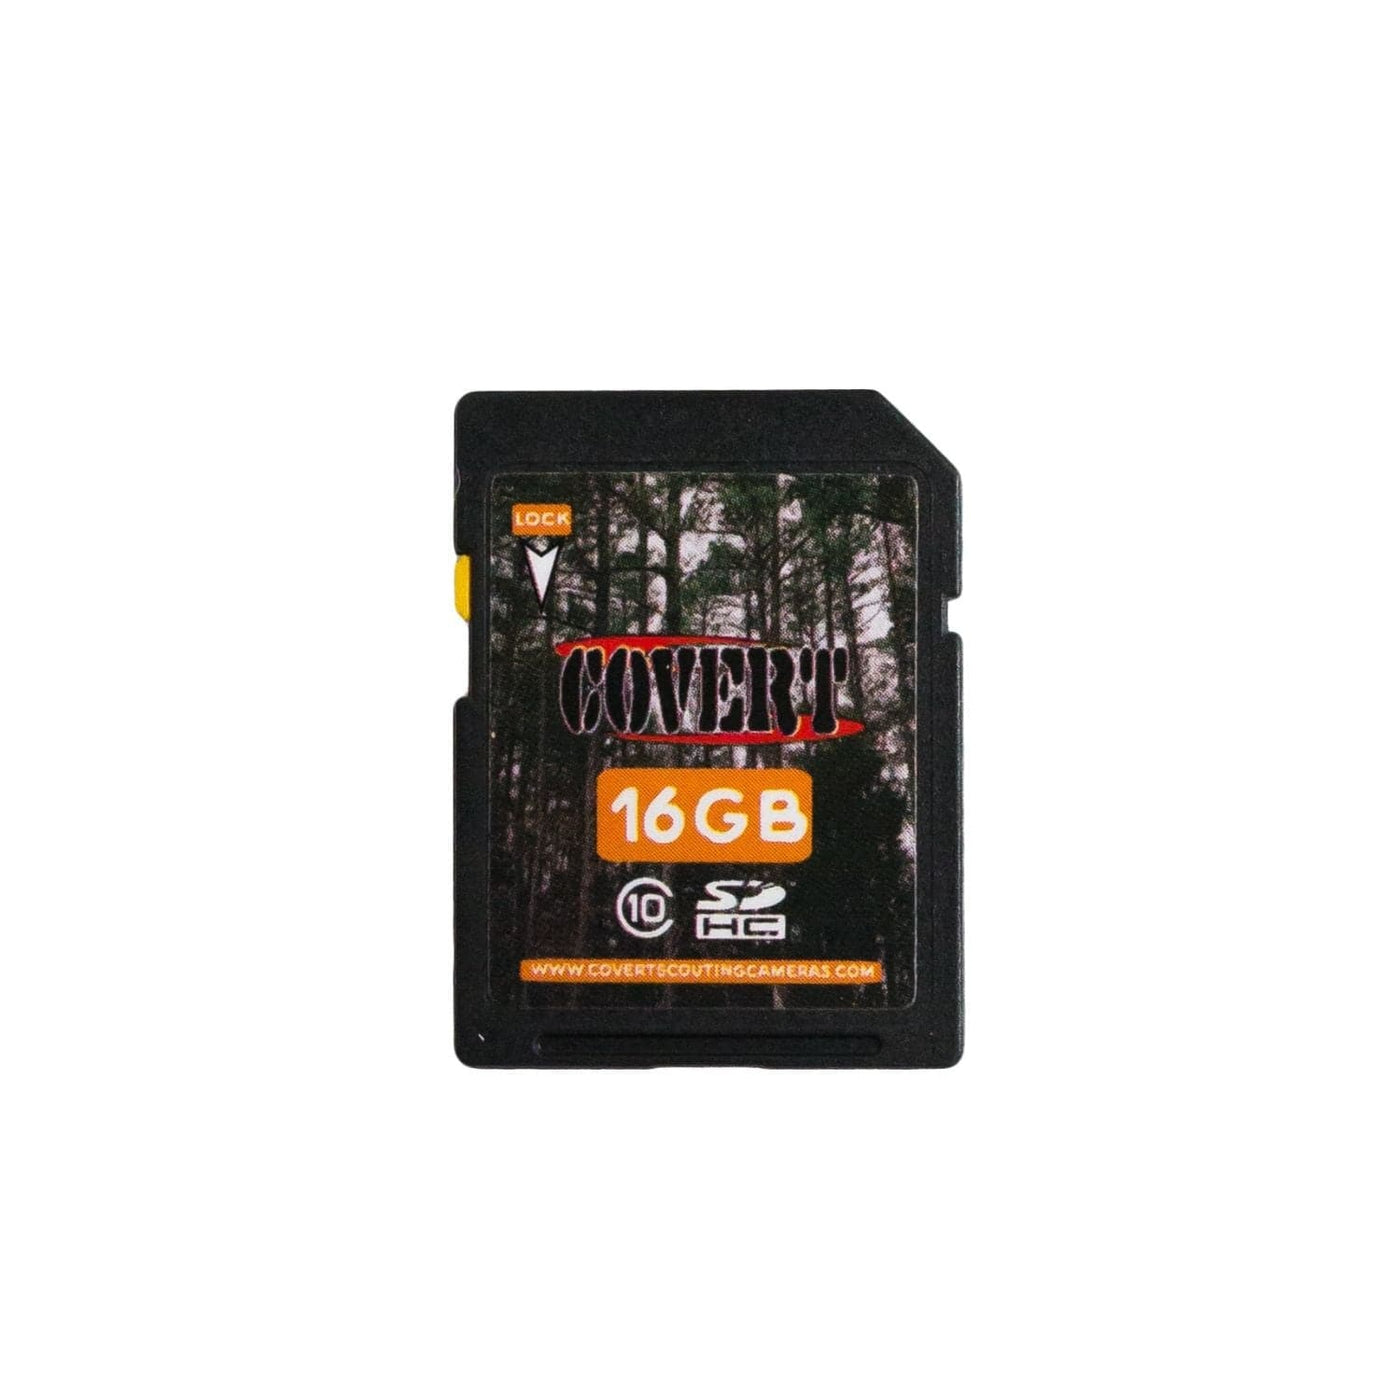 Covert Scouting Cameras Covert SD Card 16 Gb Hunting